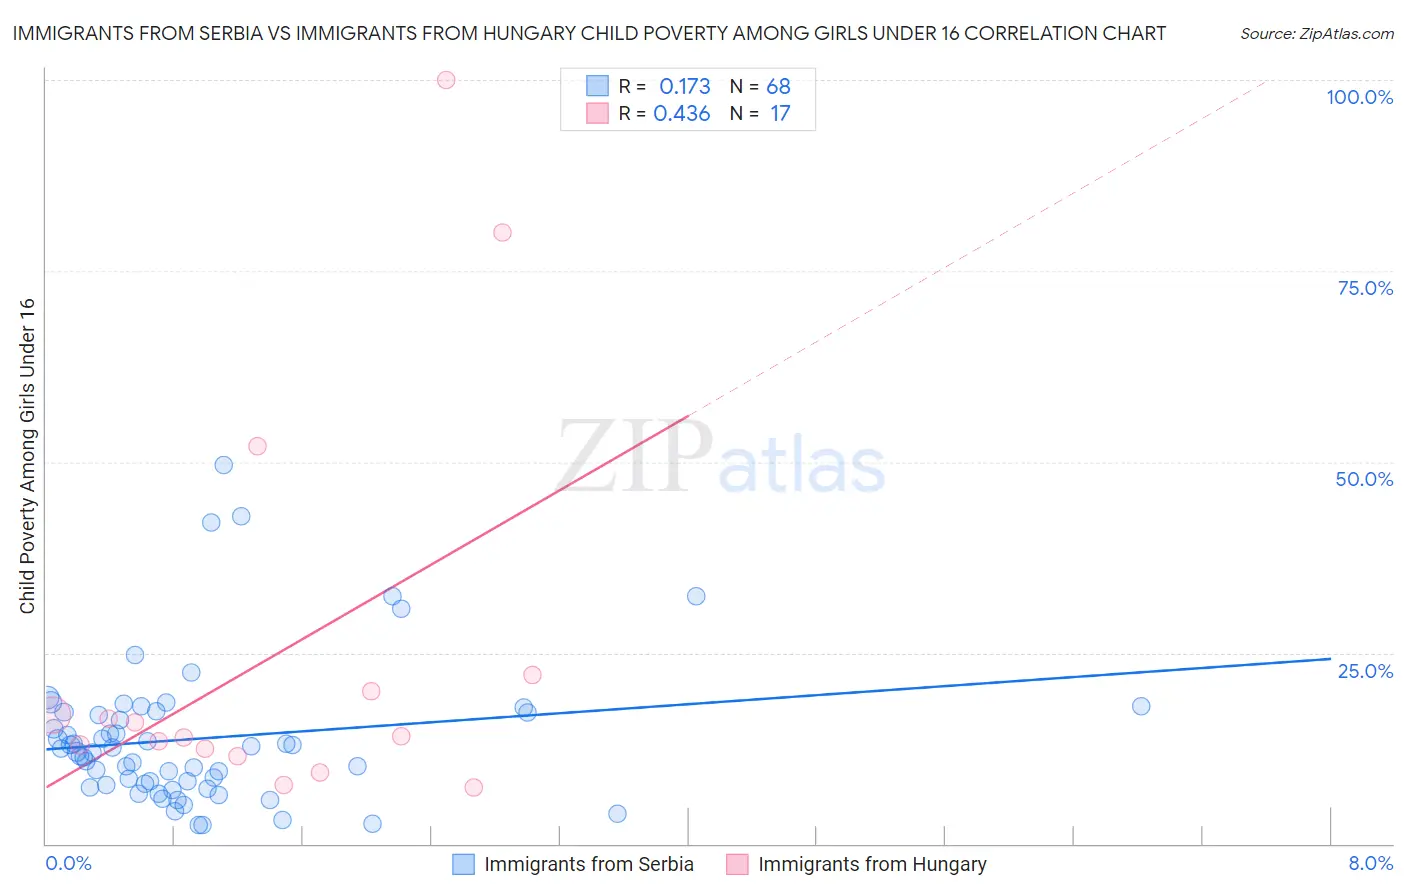 Immigrants from Serbia vs Immigrants from Hungary Child Poverty Among Girls Under 16